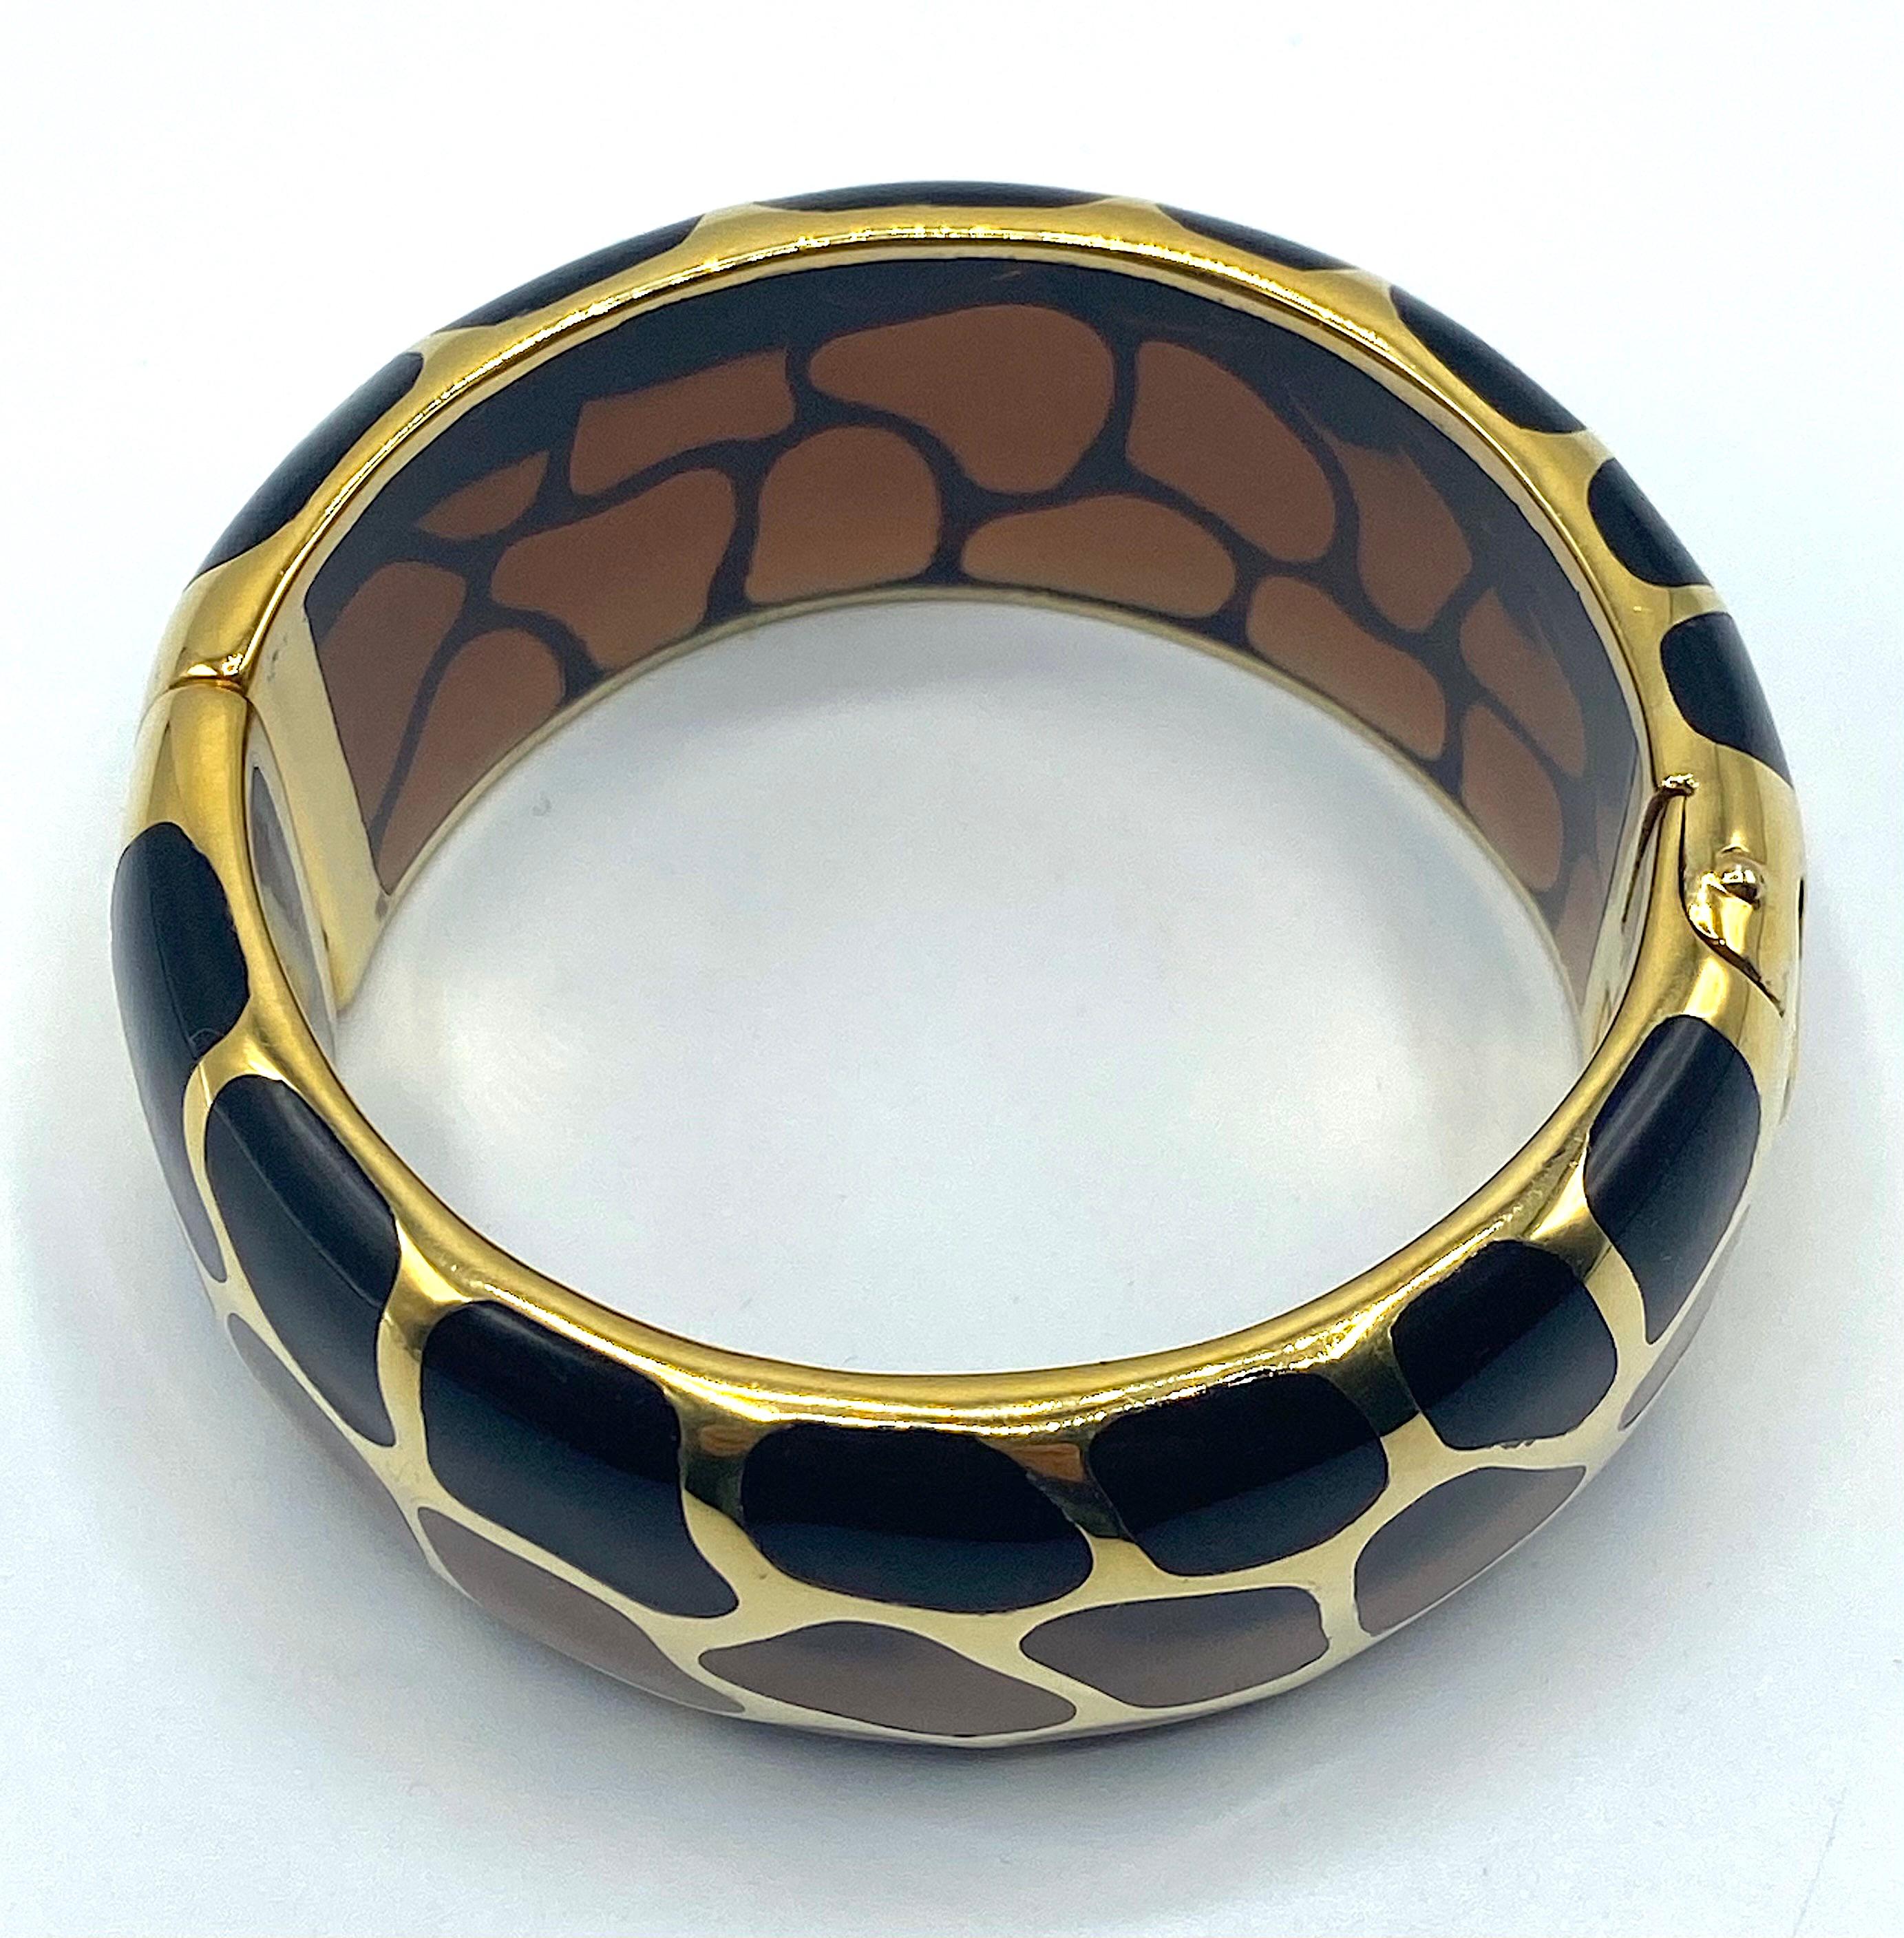 A beautiful animal motif bangle from the Safari collection by French jewelry company Angélique de Paris. The bangle lightly oval in shape. It is a transparent brown resin overlaid with .925 sterling silver and 18K gold plate. It is a clamper style